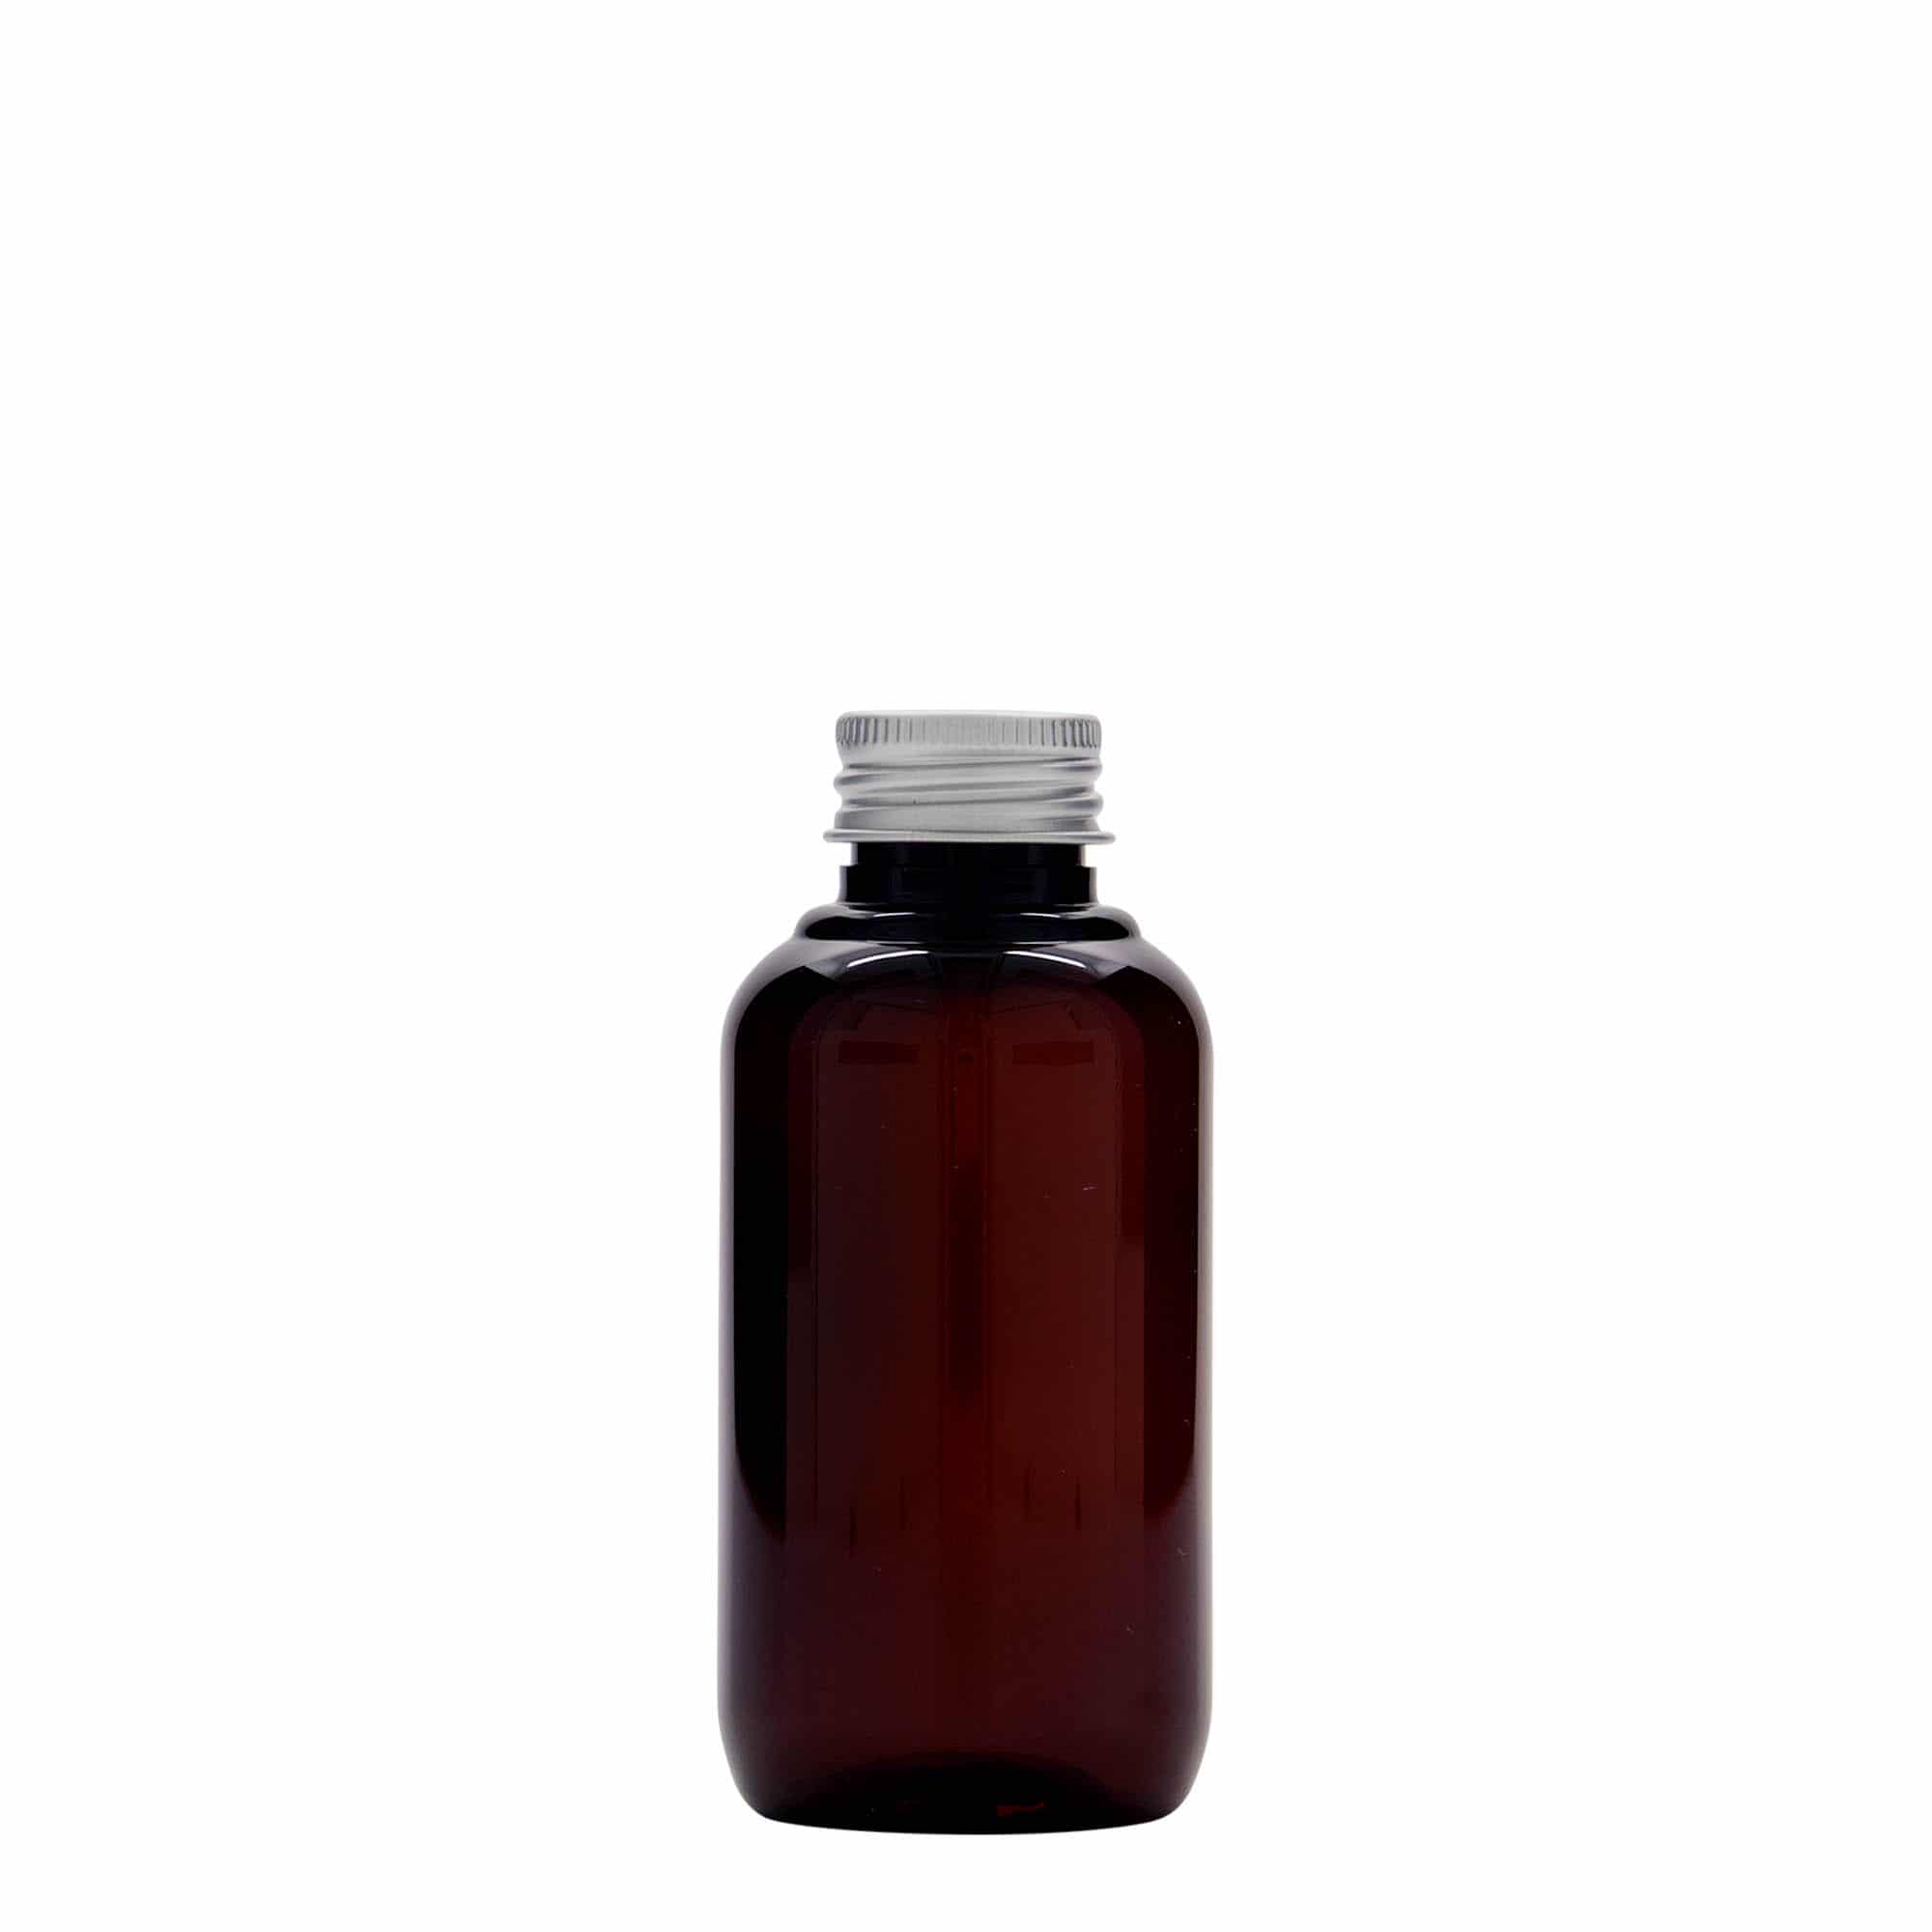 100 ml recycled plastic bottle 'Victor's Best', PCR, brown, closure: GPI 24/410